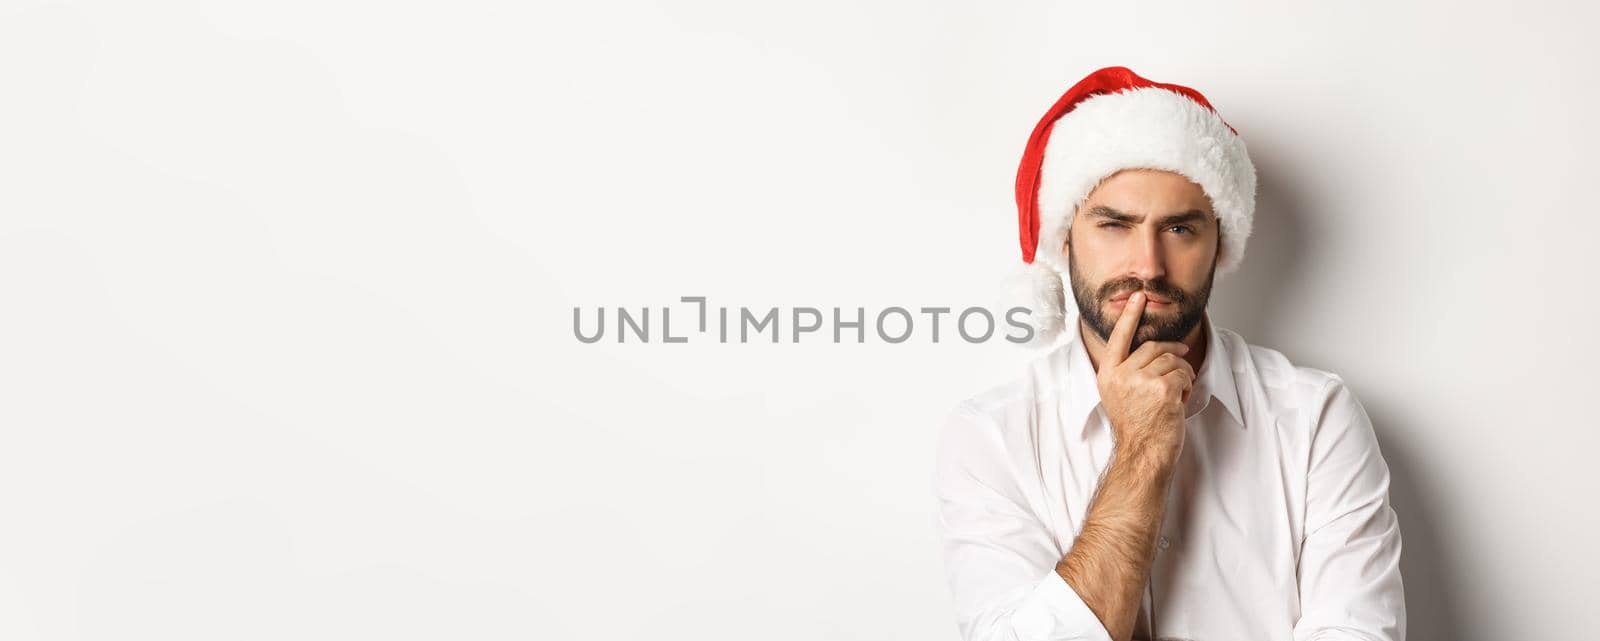 Party, winter holidays and celebration concept. Serious man thinking about christmas and new year, wearing santa hat, white background.